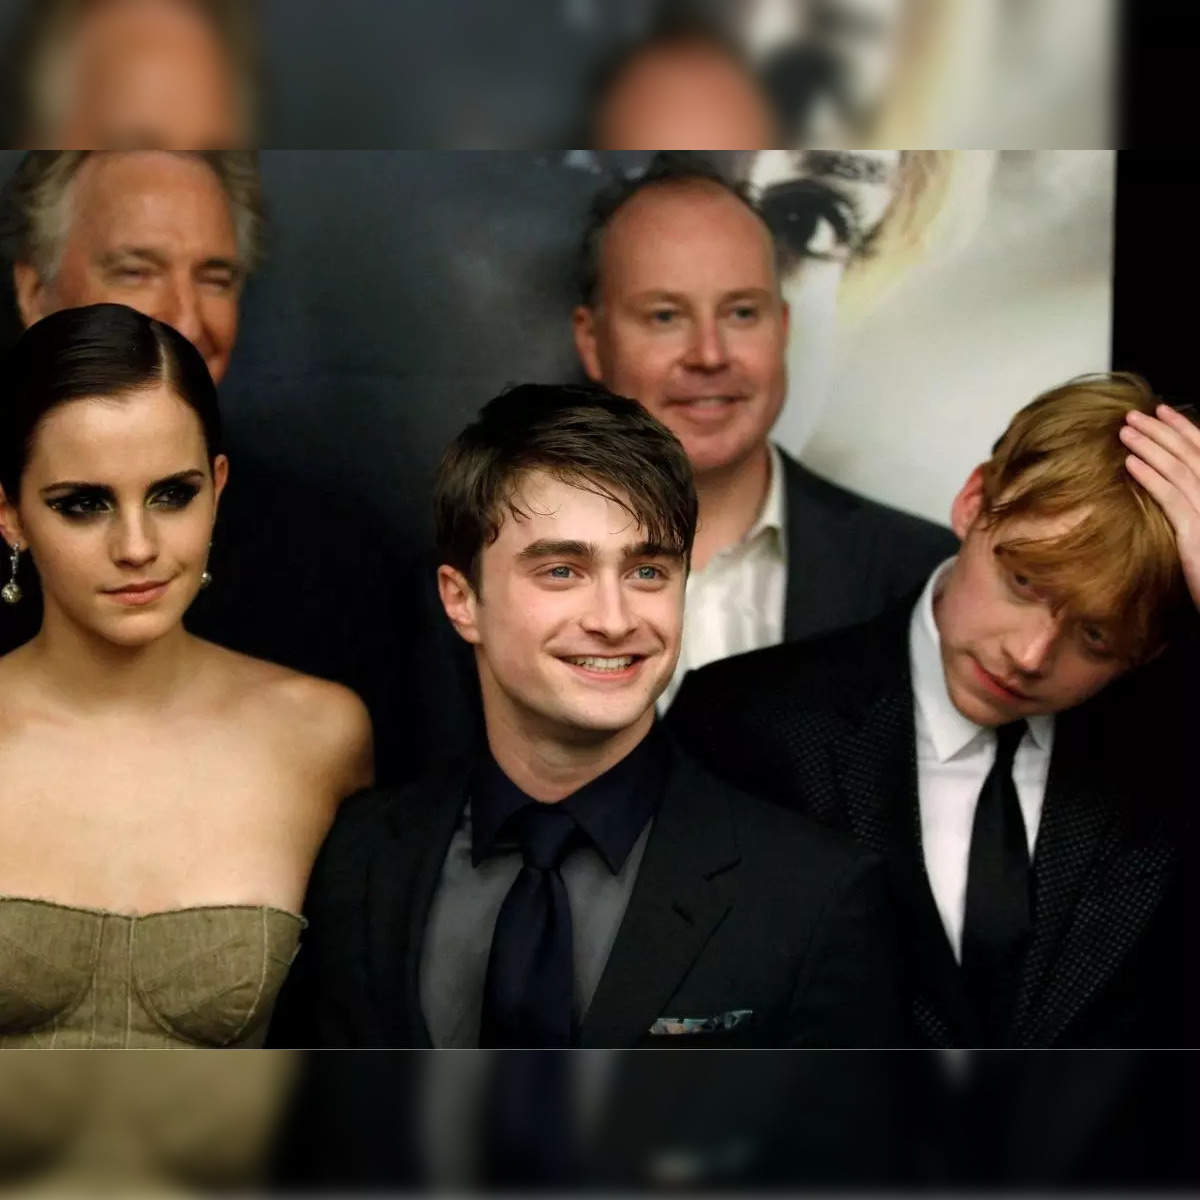 Harry Potter series will be tricky to cast, says WB boss